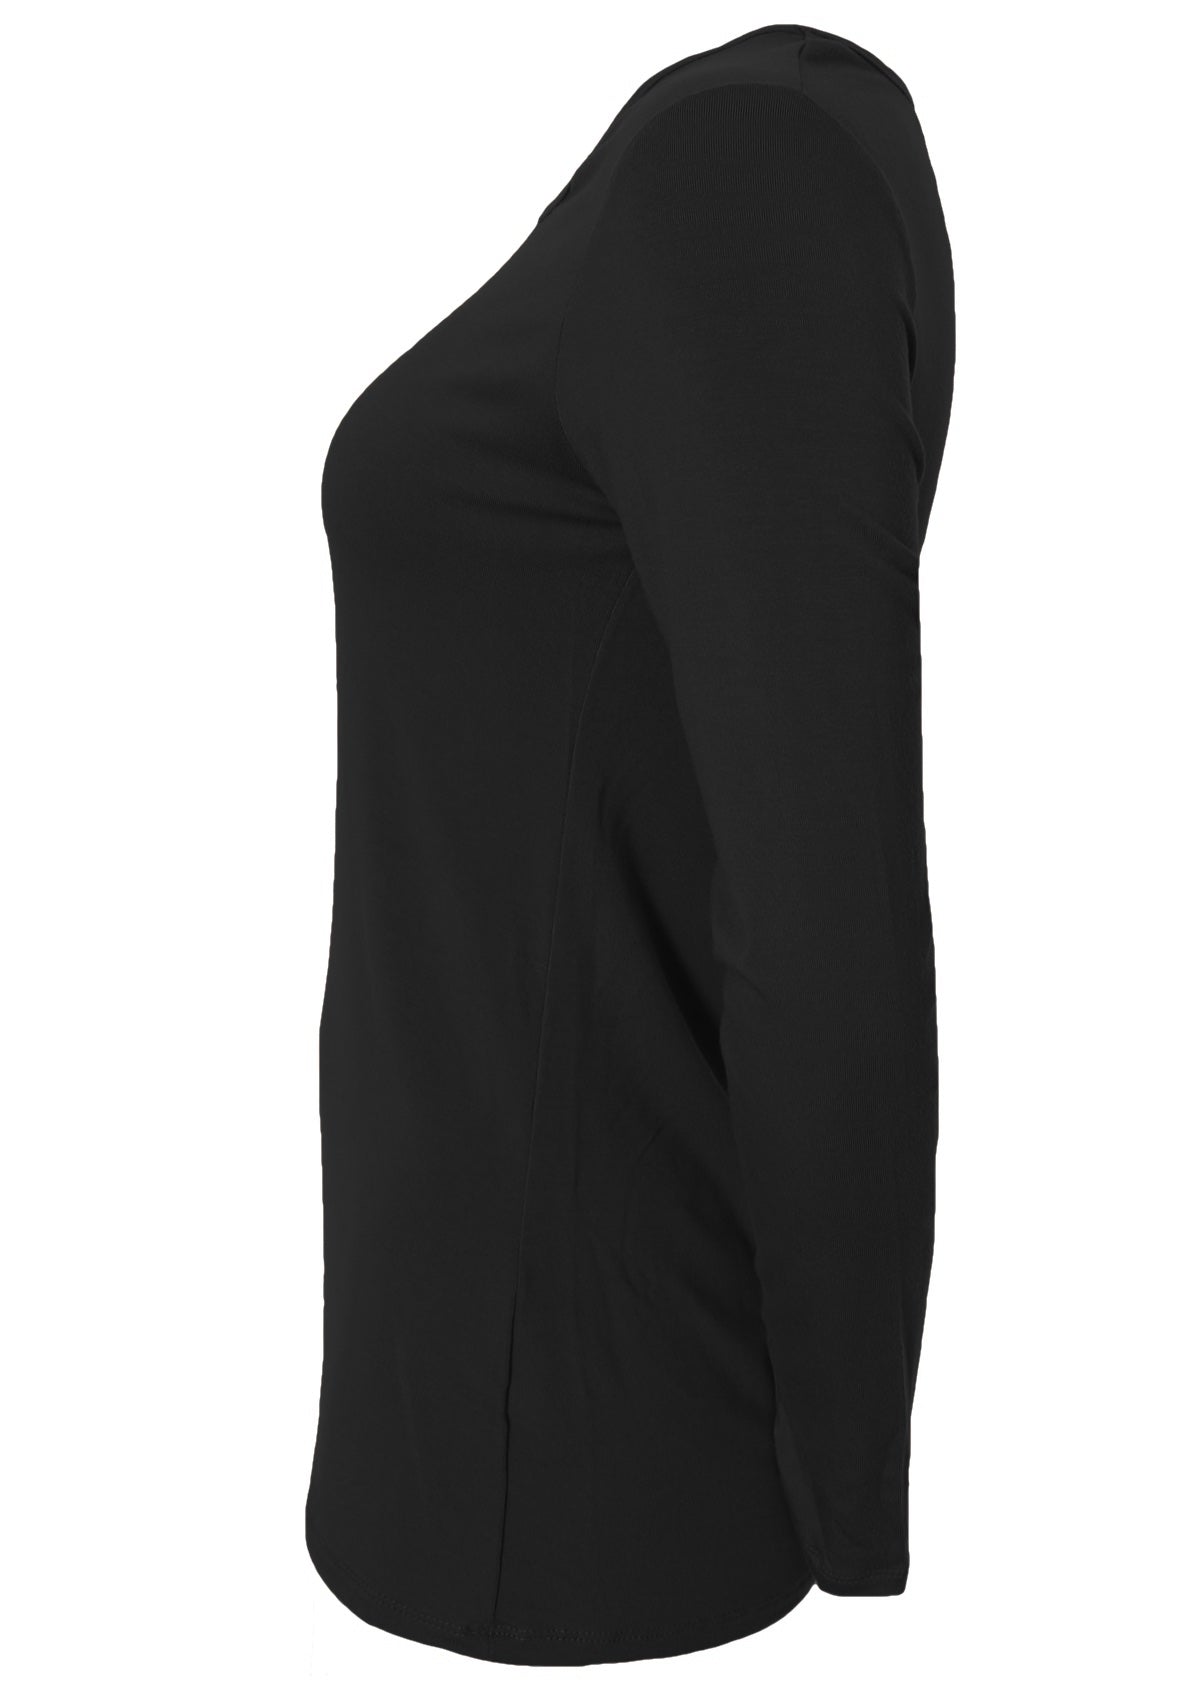 Side view of women's round neck black long sleeve rayon top.